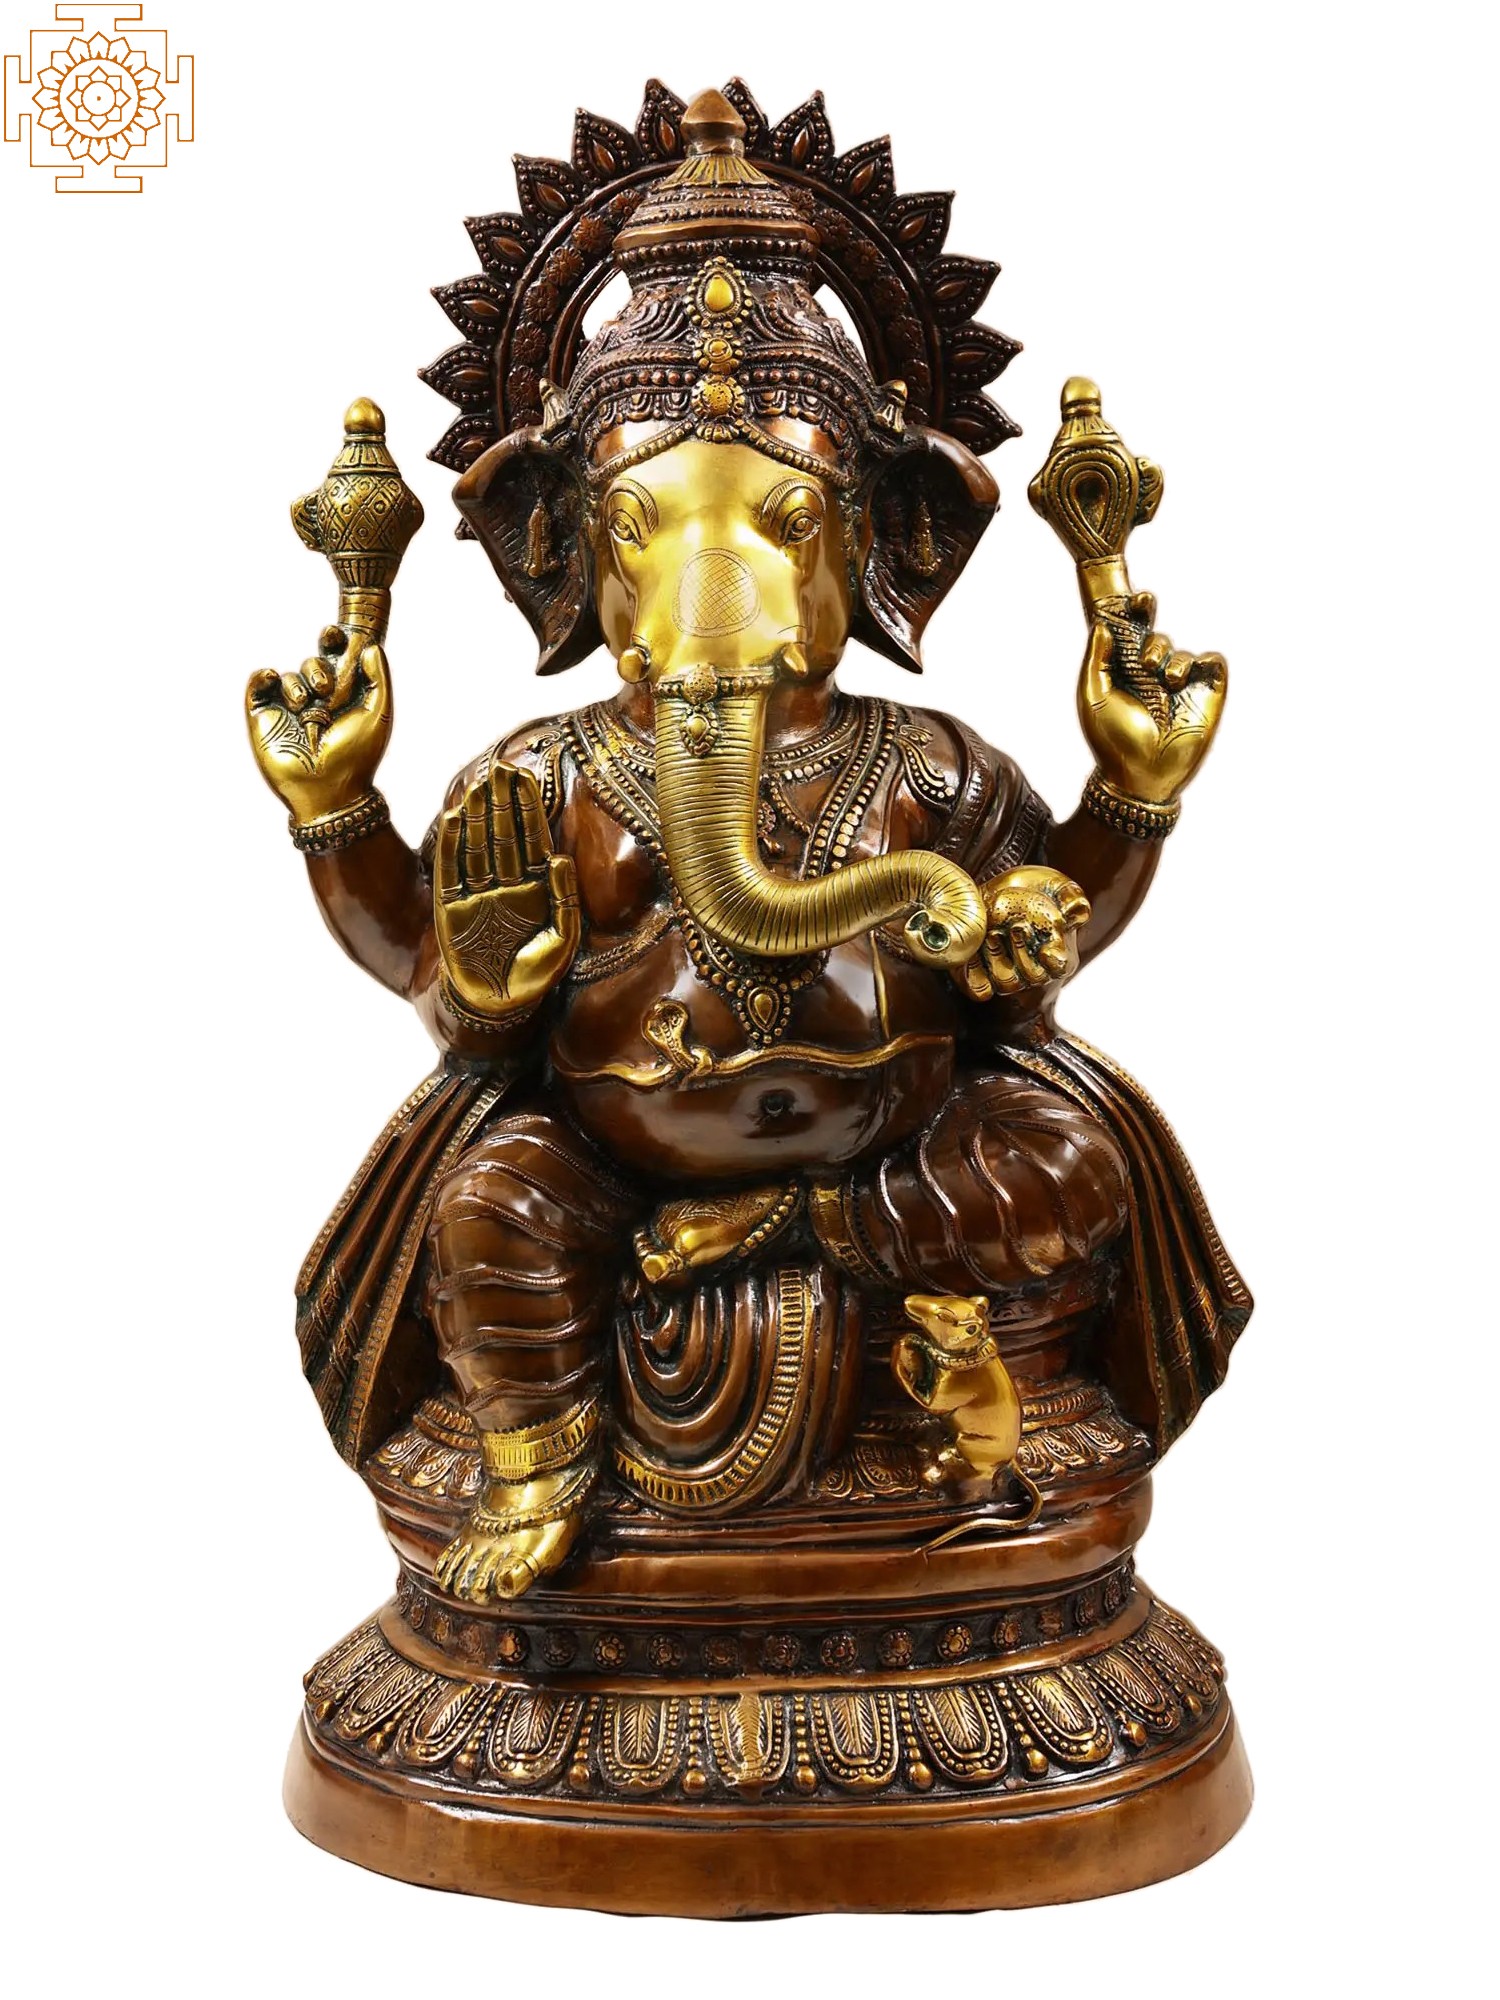 The Blessing Unique Ganesh Elephant God with Four Arms and Vintage Brass Bell Necklace